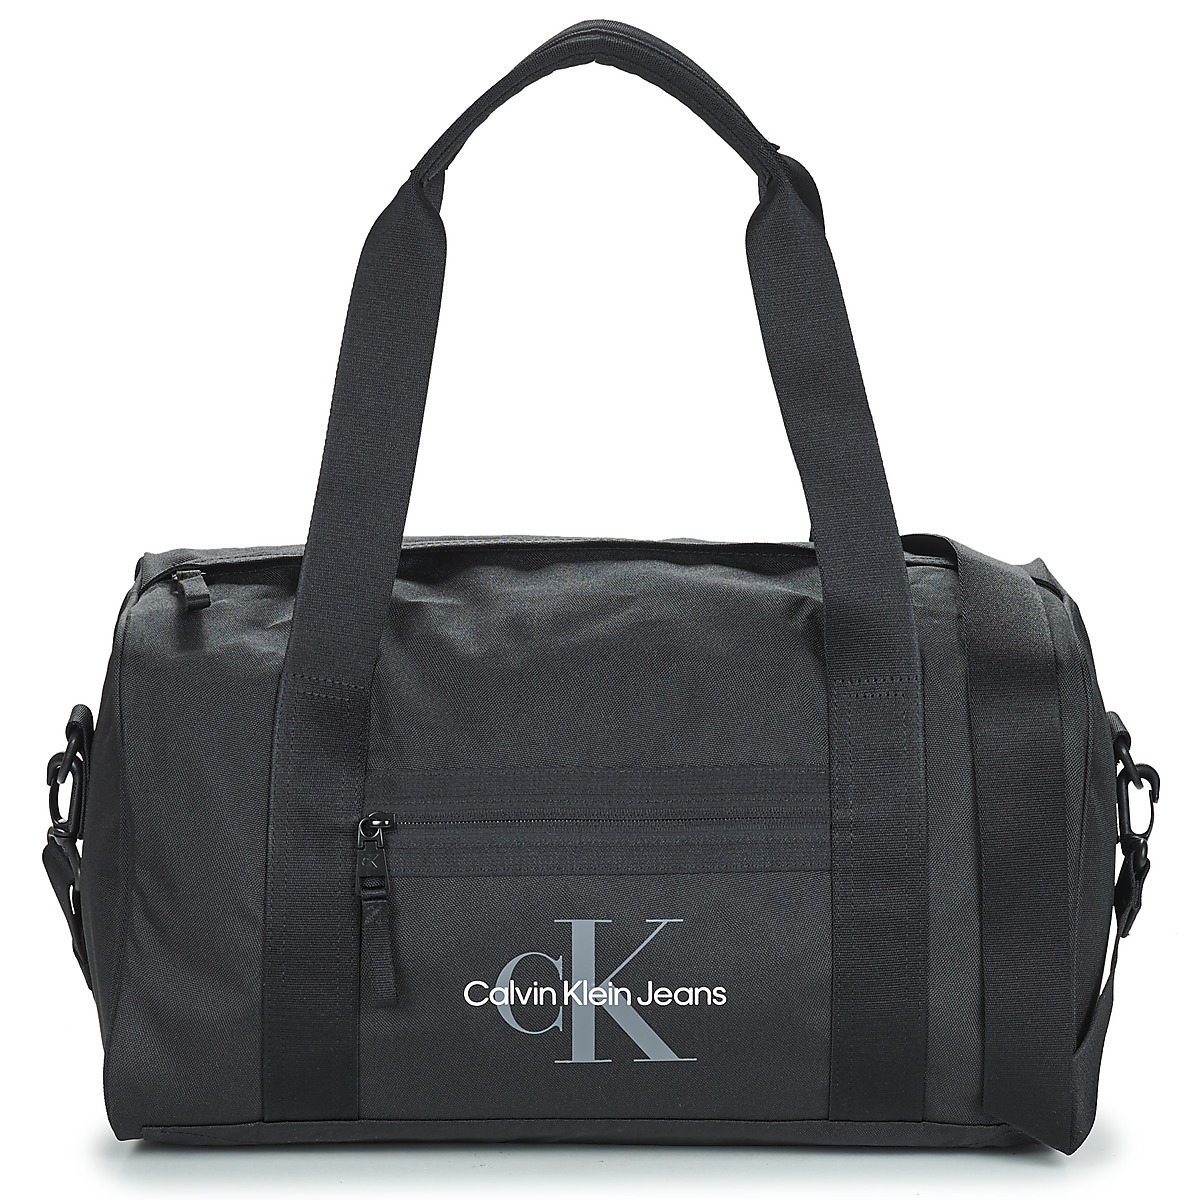 Calvin Klein Jeans SPORT ESSENTIALS DUFFLE43 M Black - Fast delivery |  Spartoo Europe ! - Bags Luggage 110,00 €